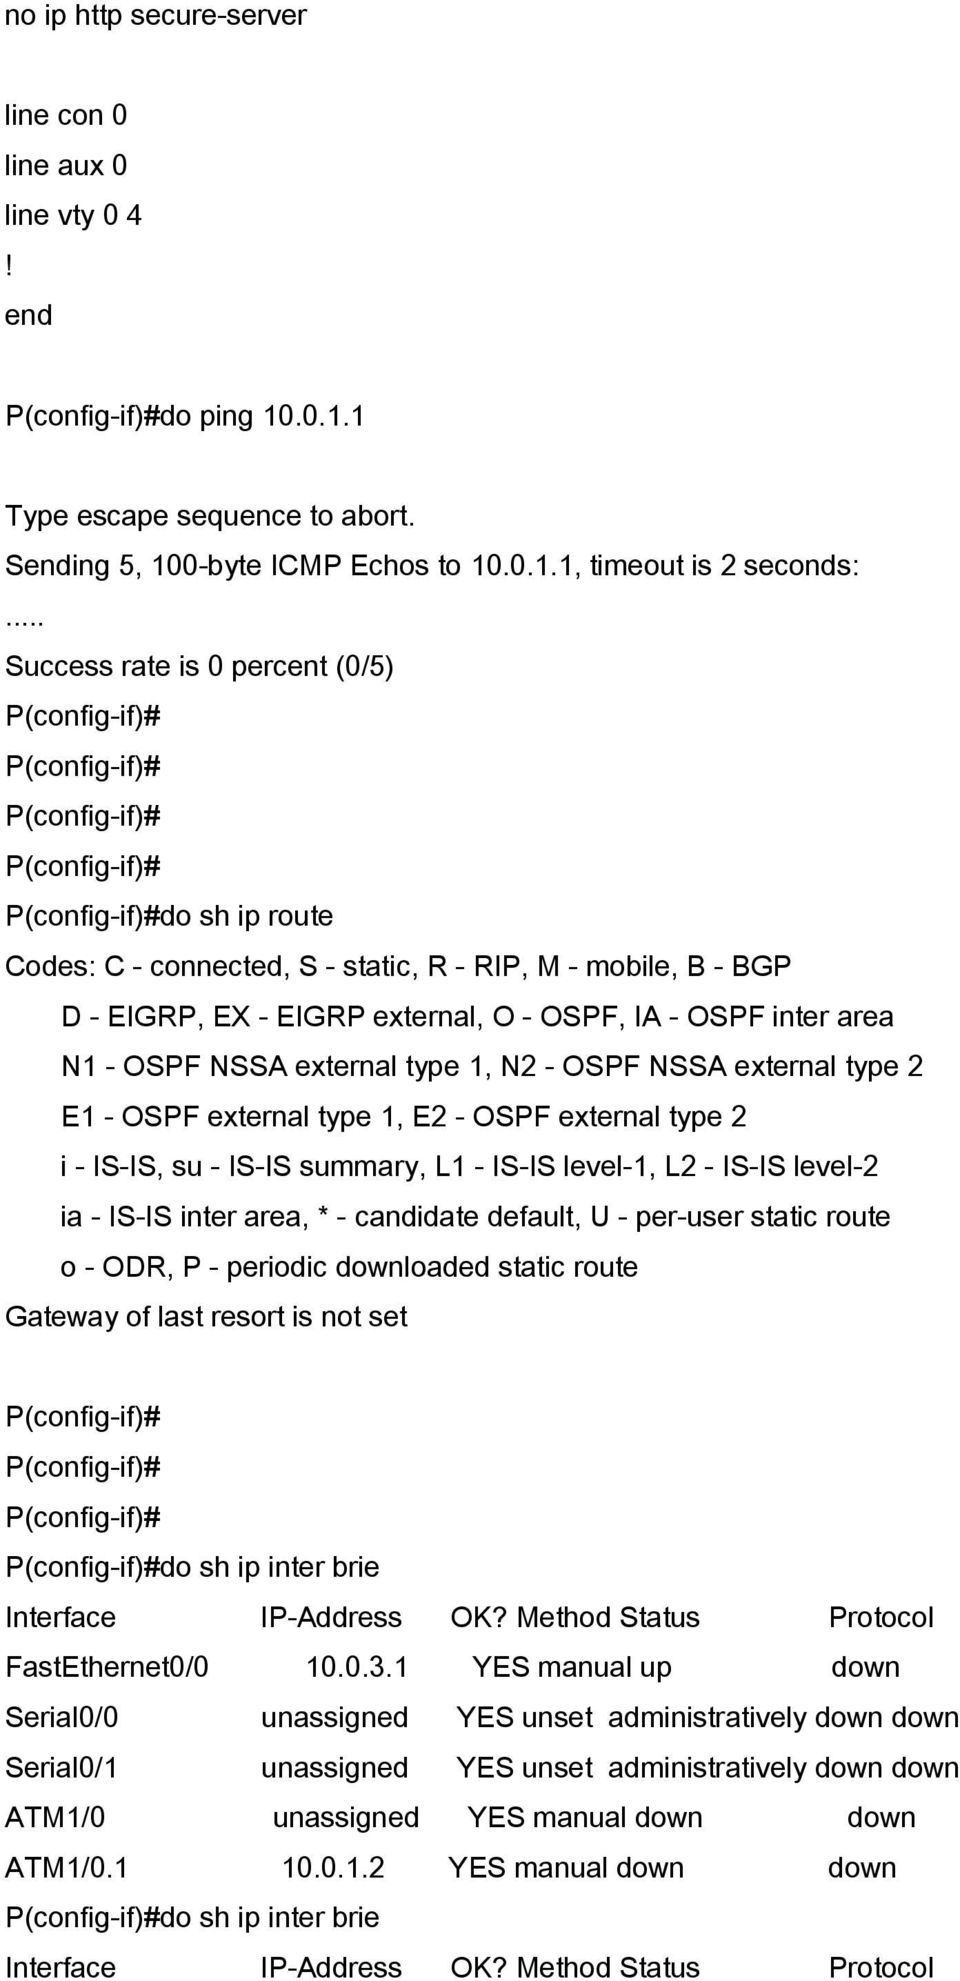 type 1, N2 - OSPF NSSA external type 2 E1 - OSPF external type 1, E2 - OSPF external type 2 i - IS-IS, su - IS-IS summary, L1 - IS-IS level-1, L2 - IS-IS level-2 ia - IS-IS inter area, * - candidate